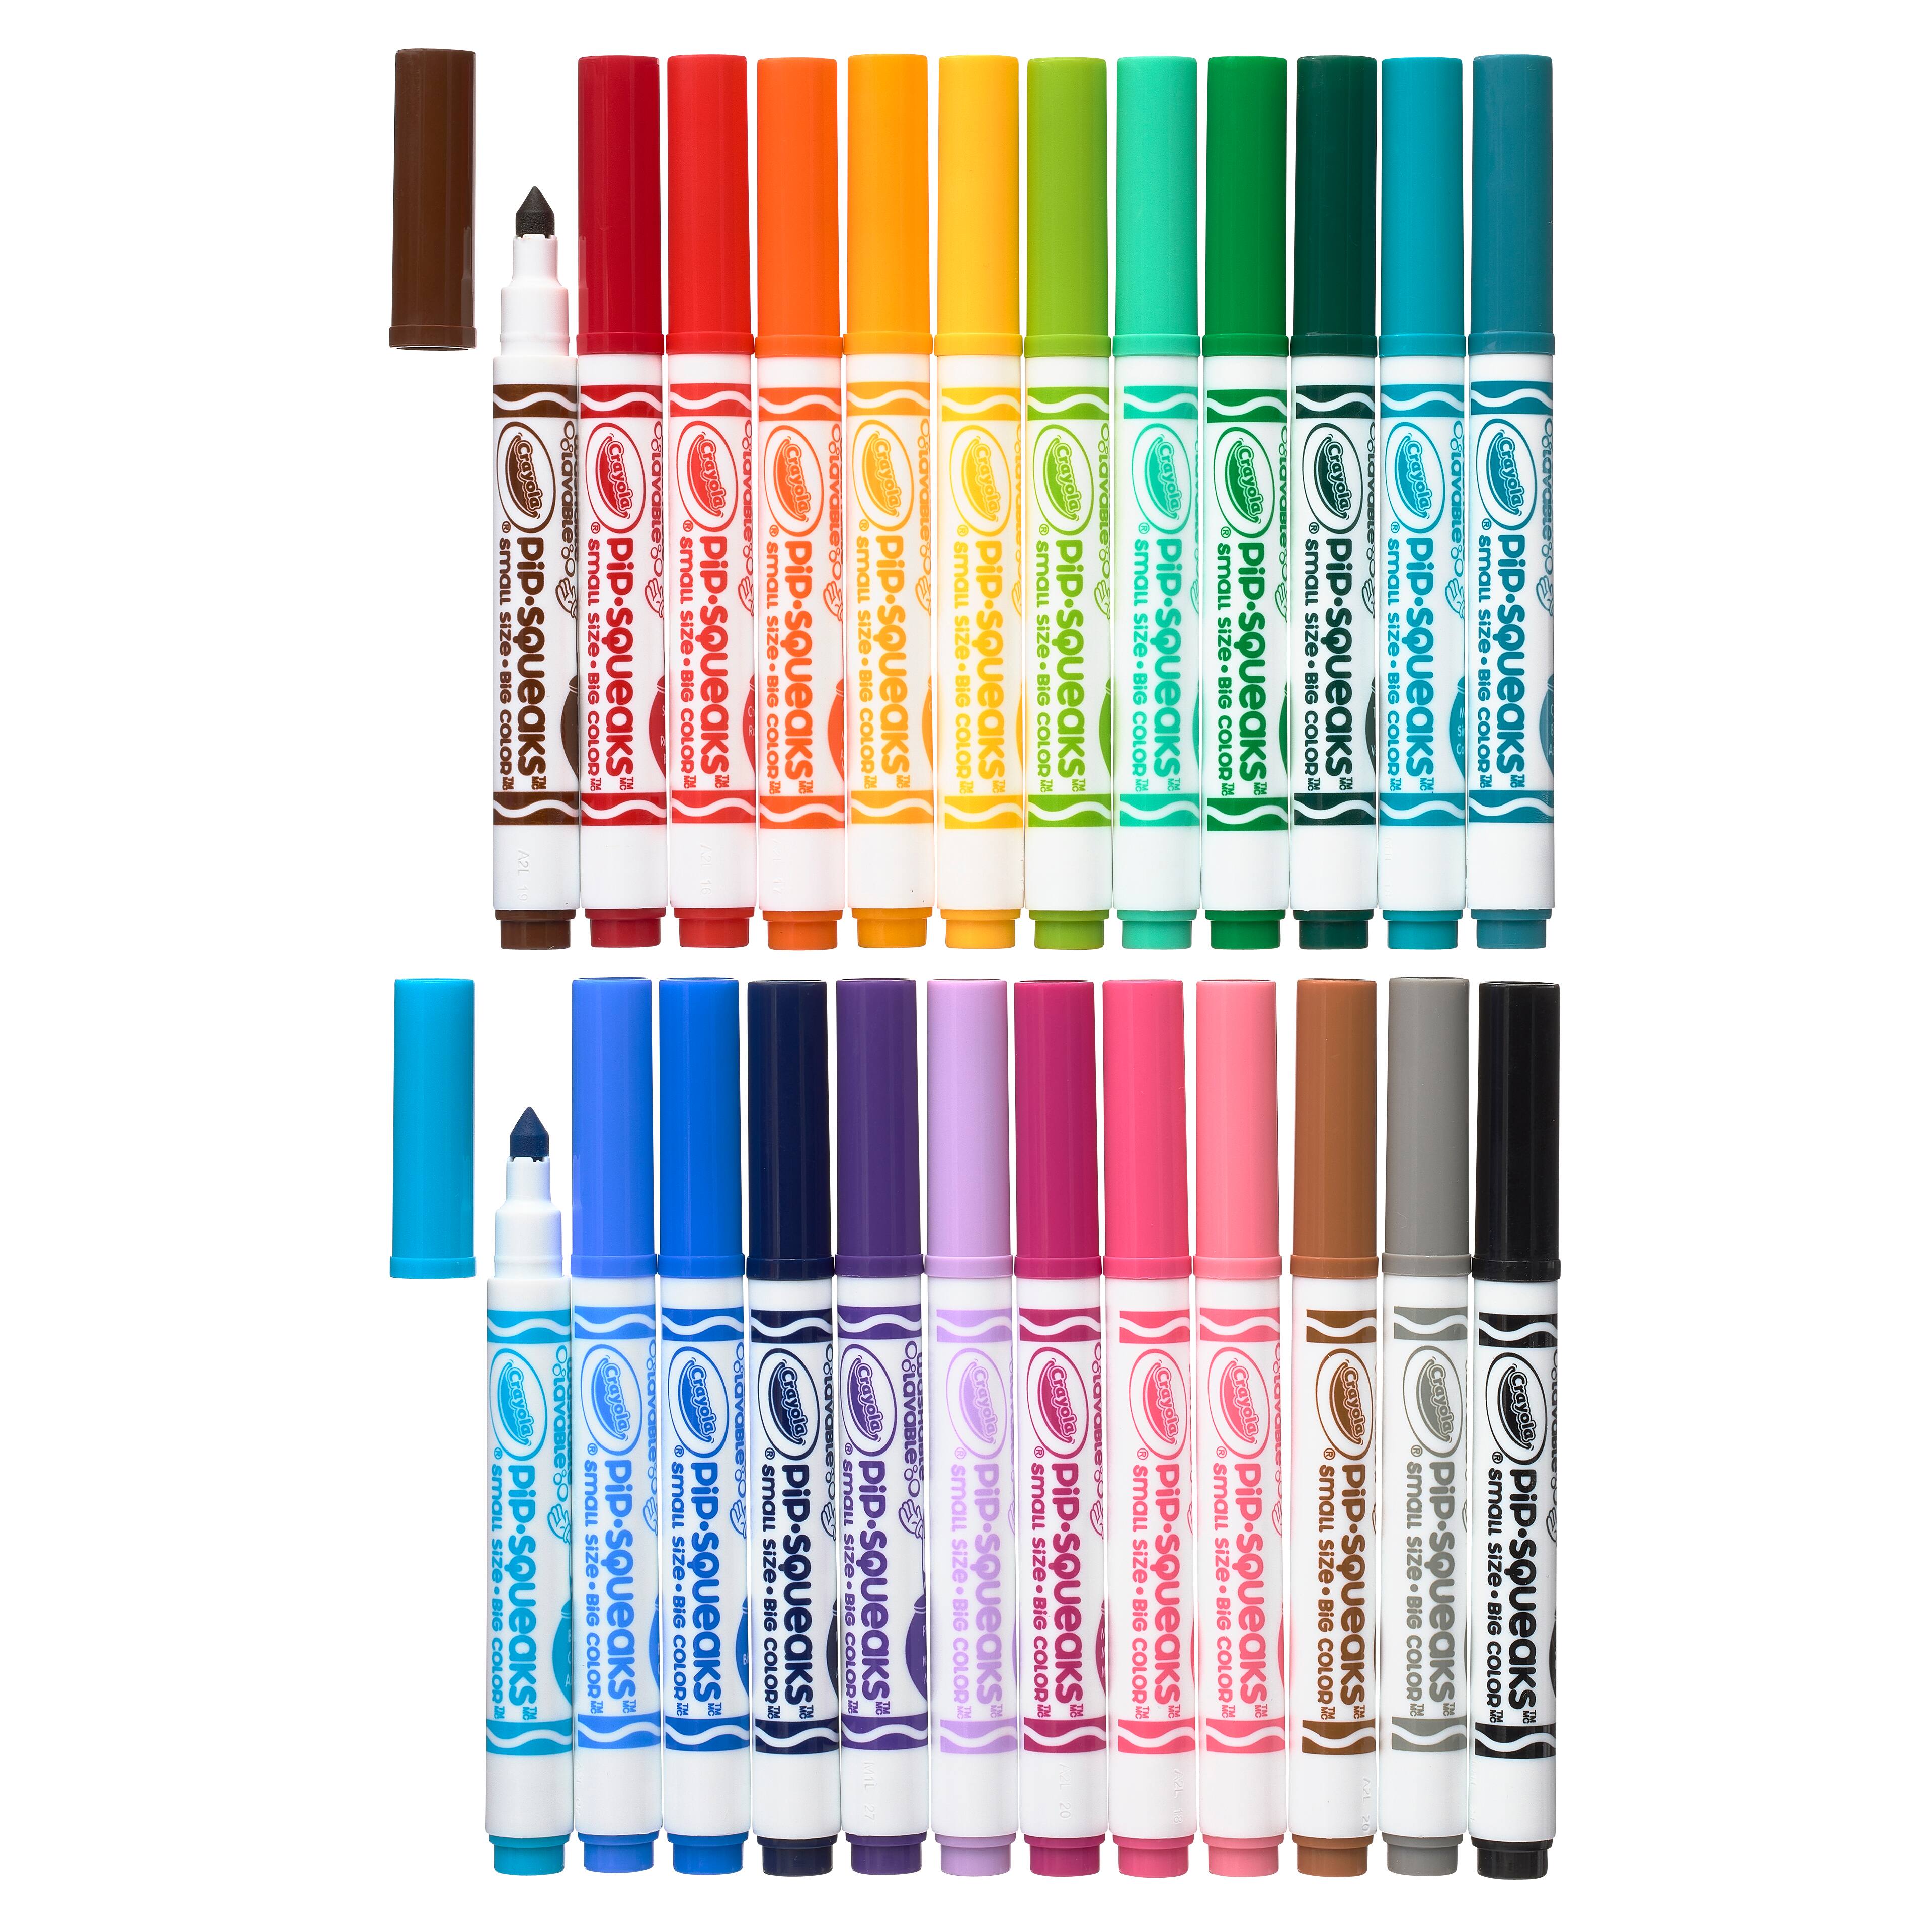 Chisel Tip Scented Washable Markers by Creatology™